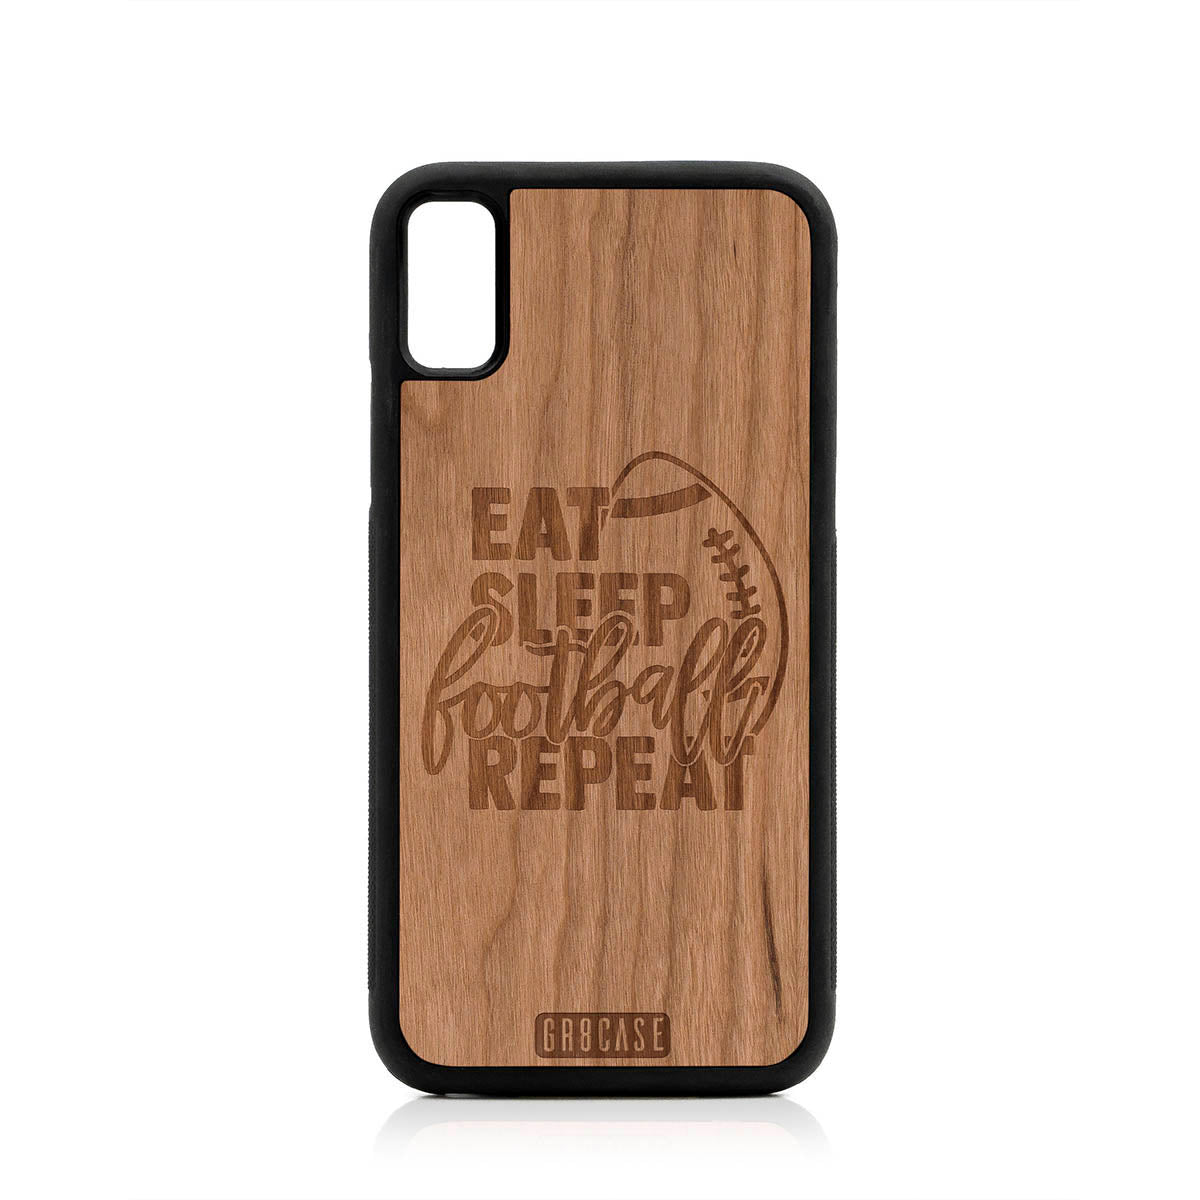 Eat Sleep Football Repeat Design Wood Case For iPhone XR